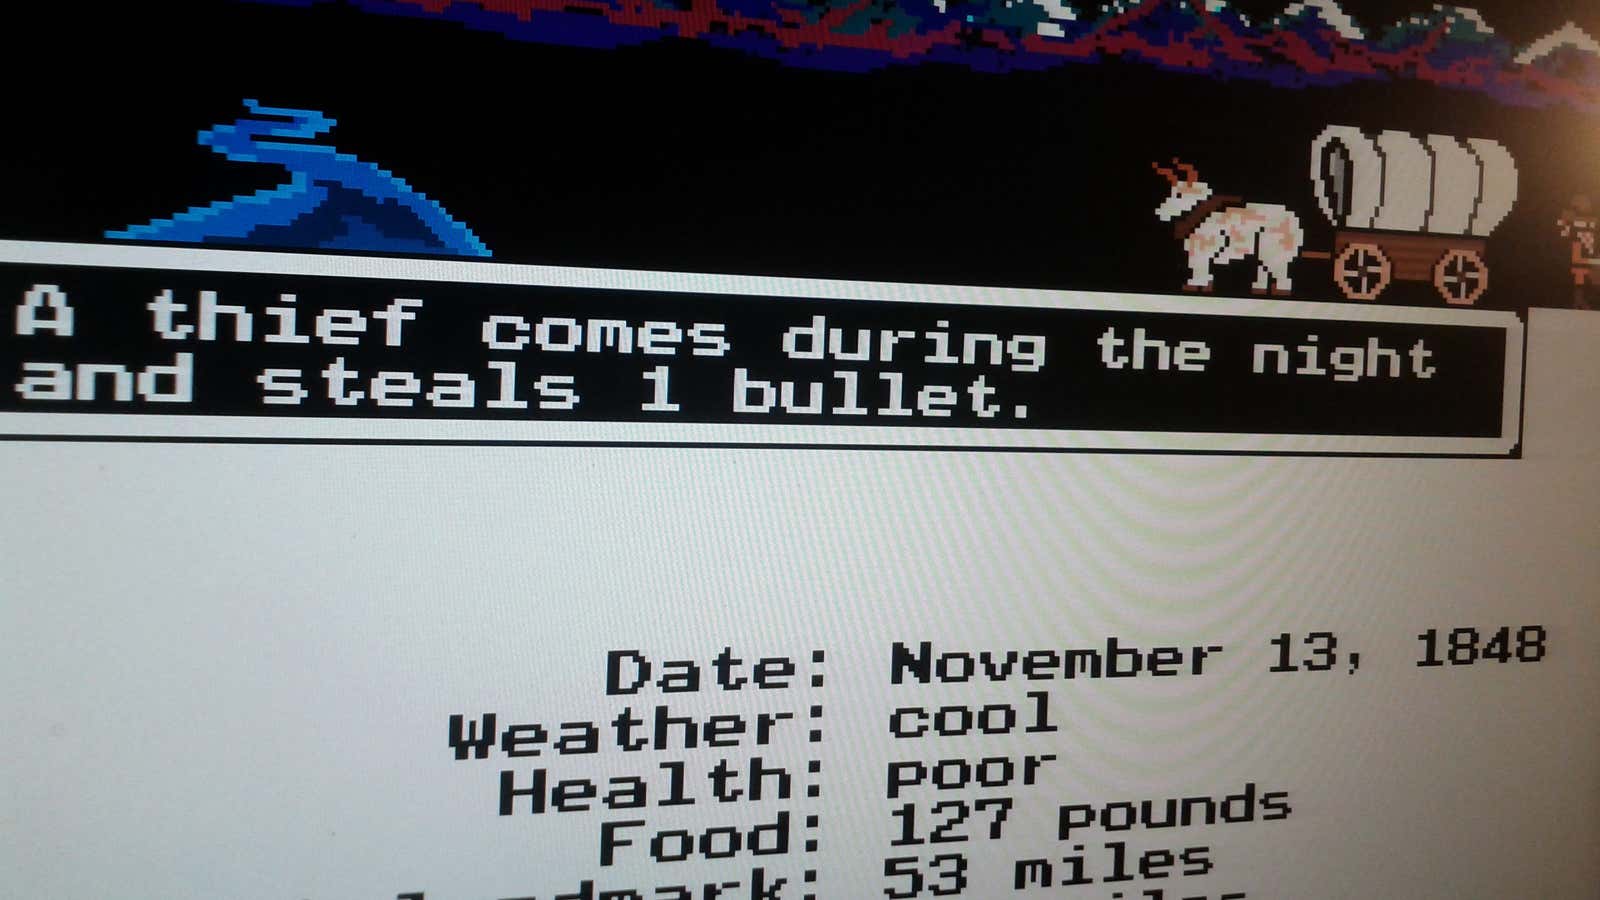 On the Oregon Trail, hardship can strike at any time.